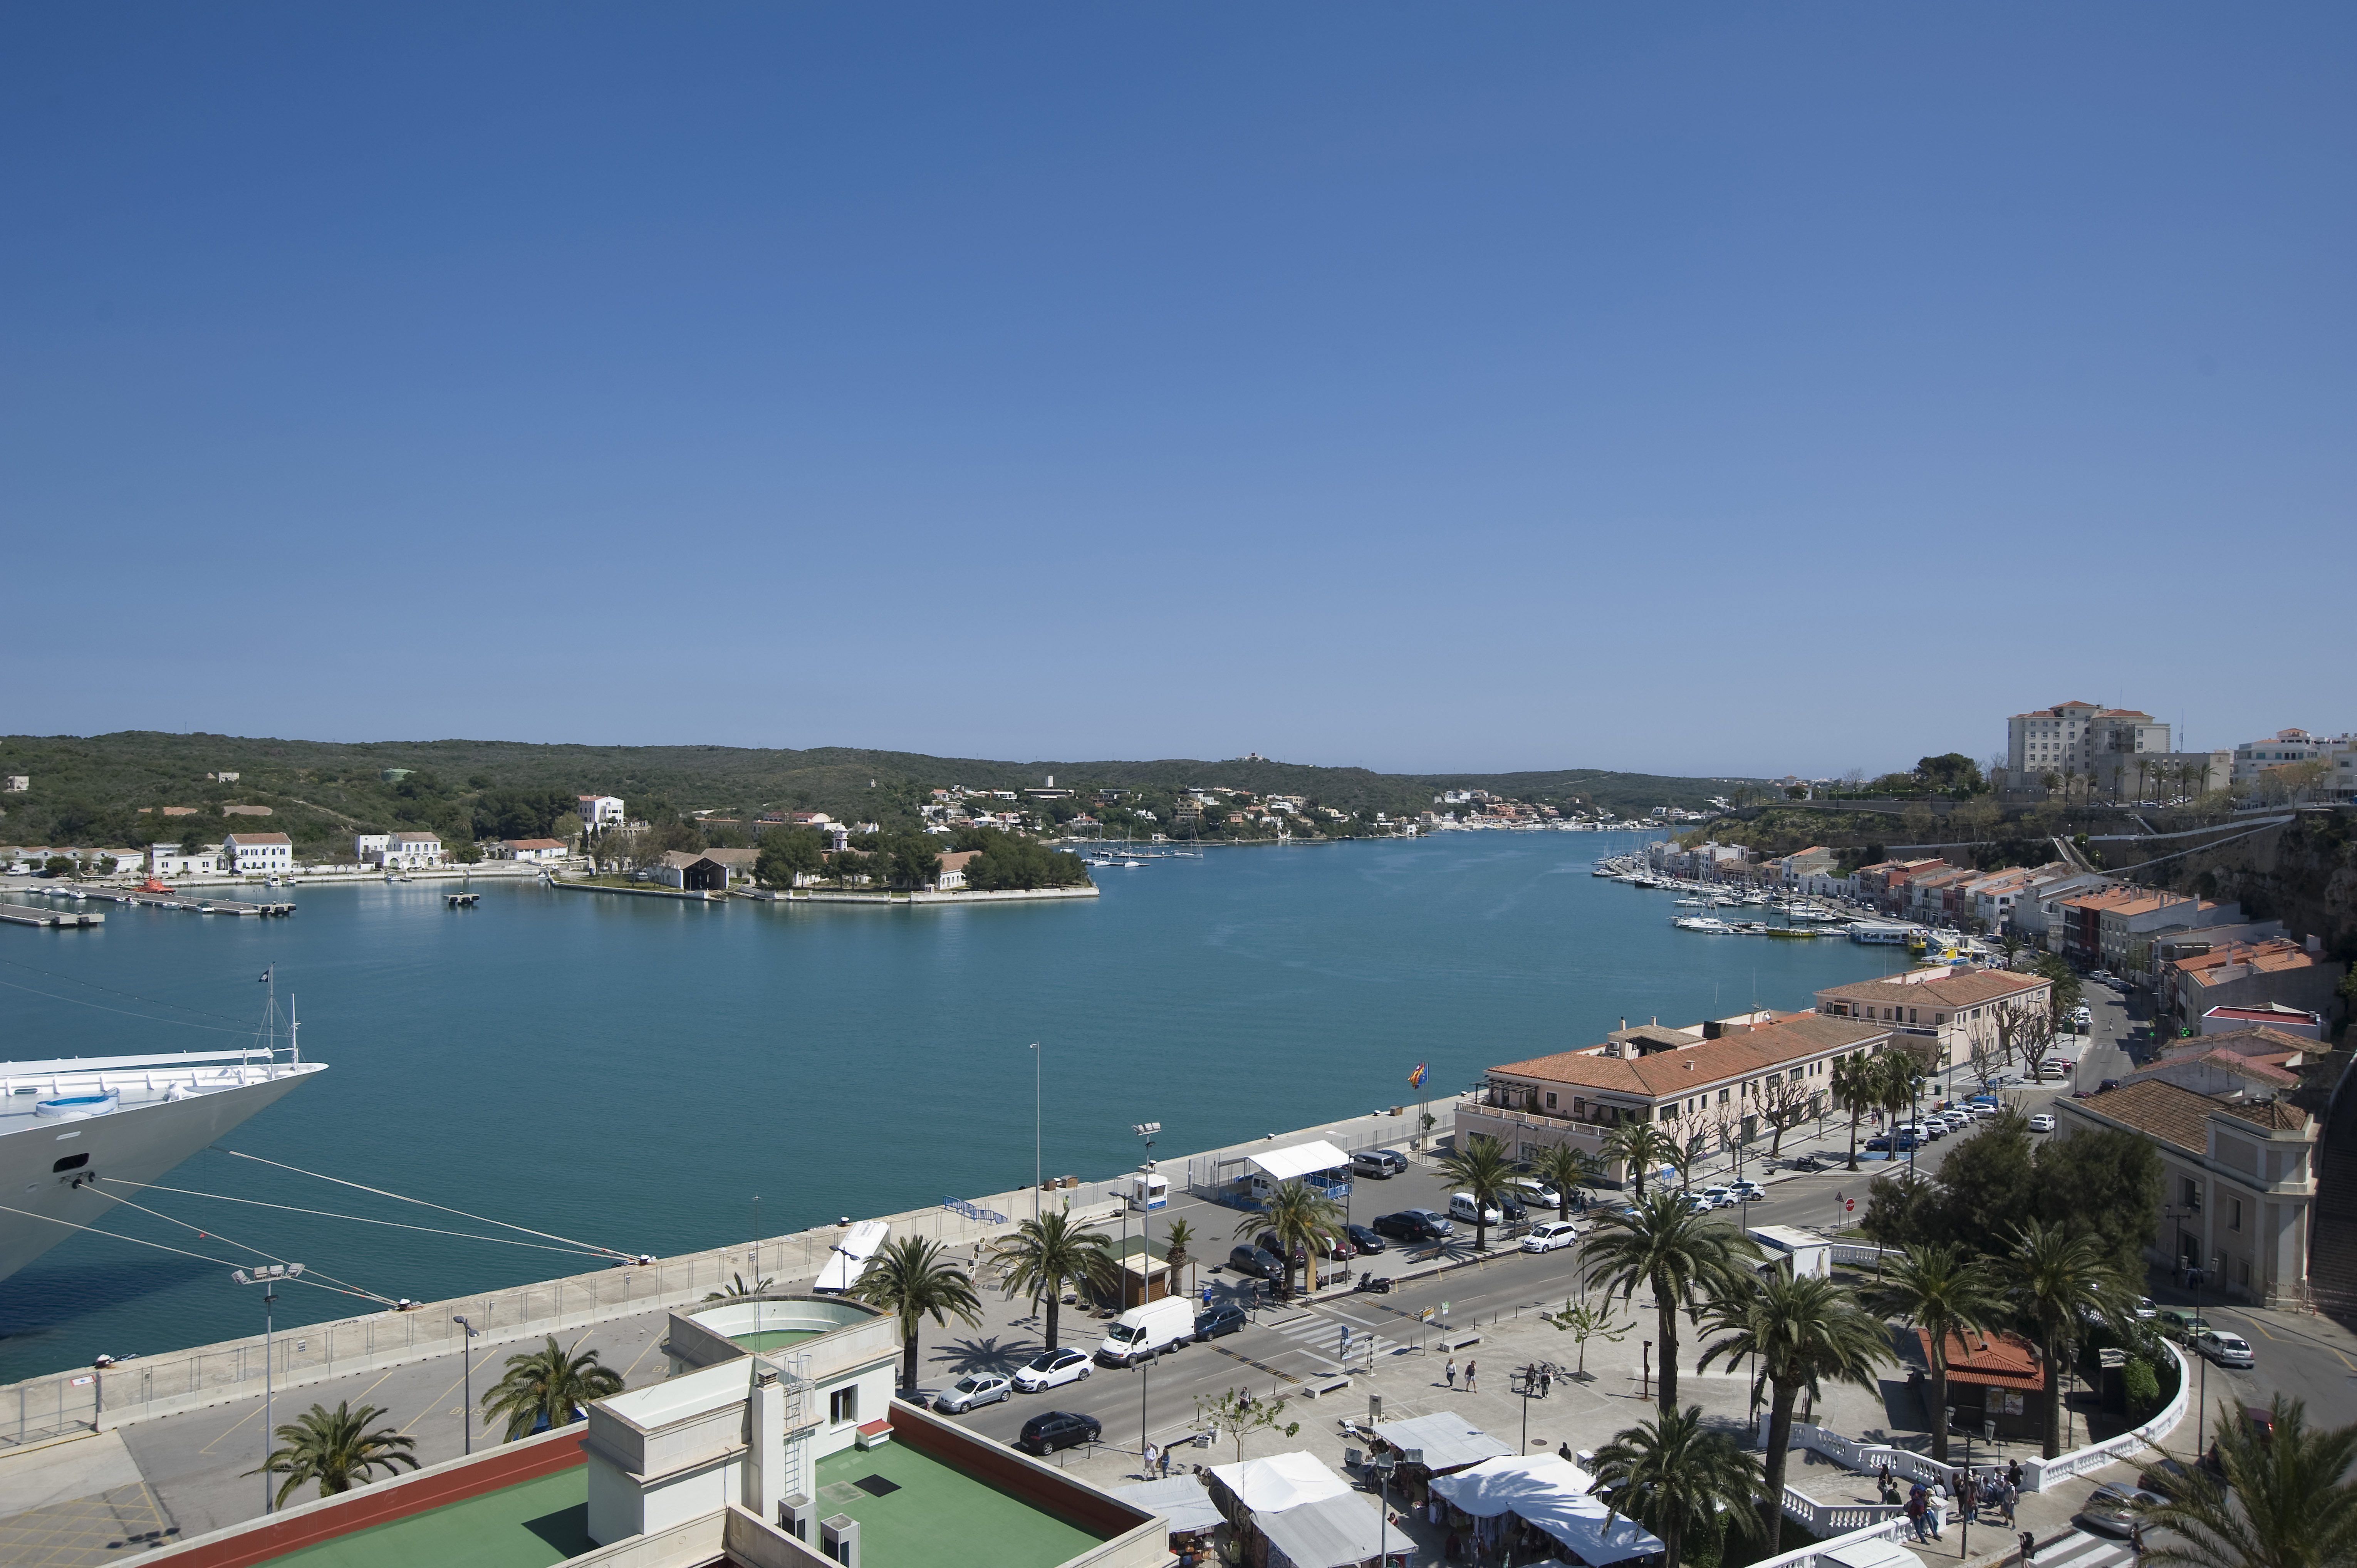 Parks and gardens maintenance contract at the Port of Mahon awarded